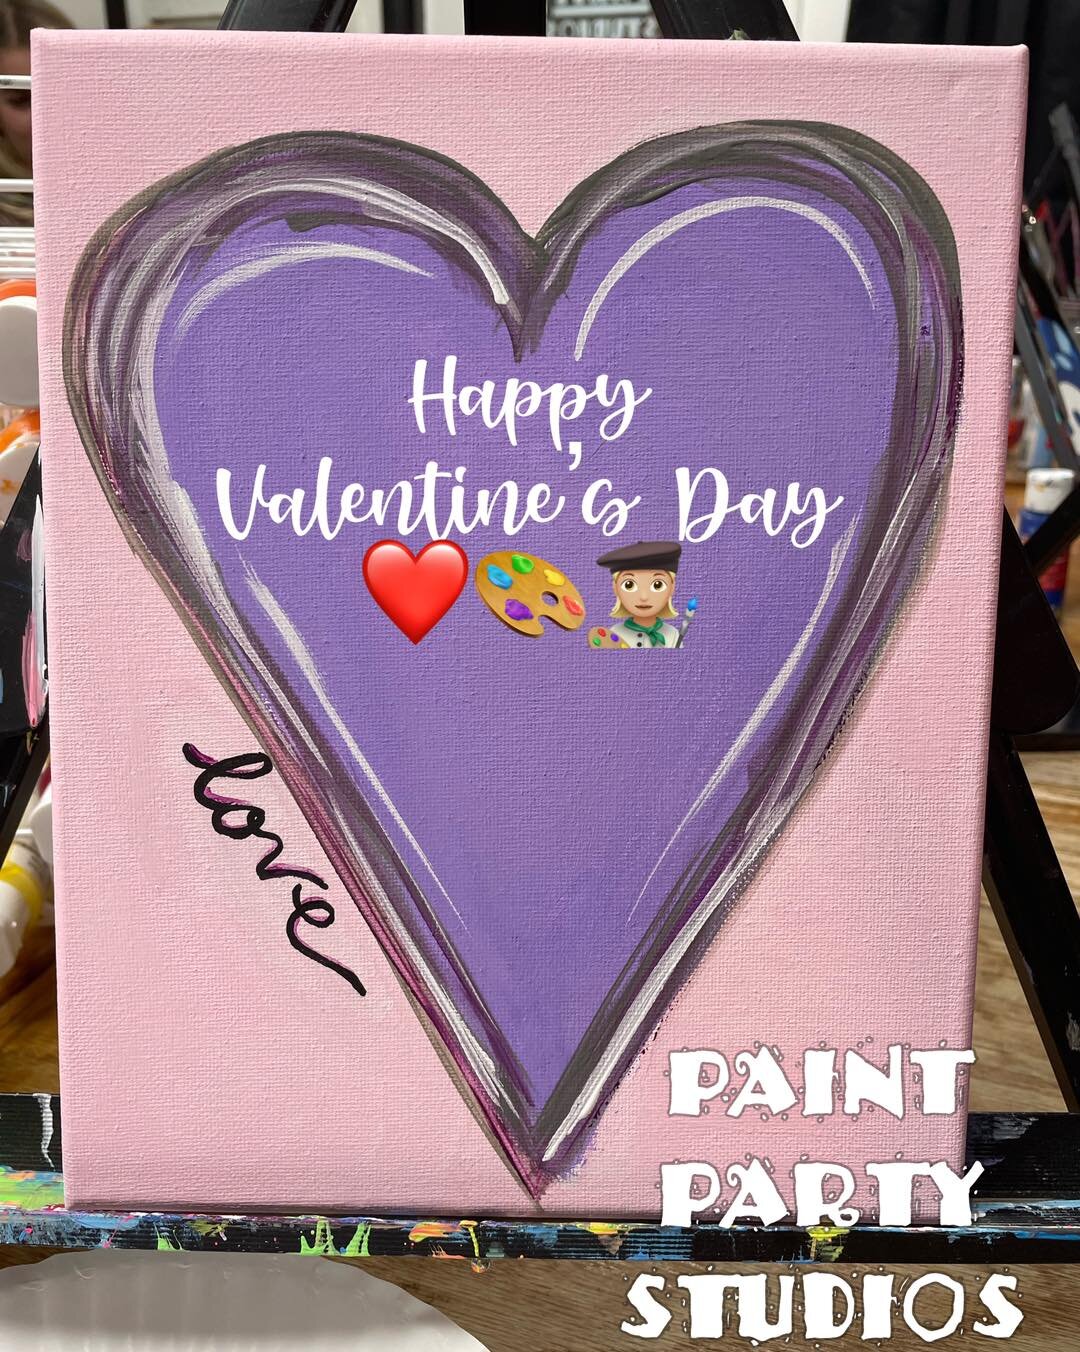 Happy Valentine&rsquo;s Day from Paint Party Studios ❤️🎨👩🏼&zwj;🎨